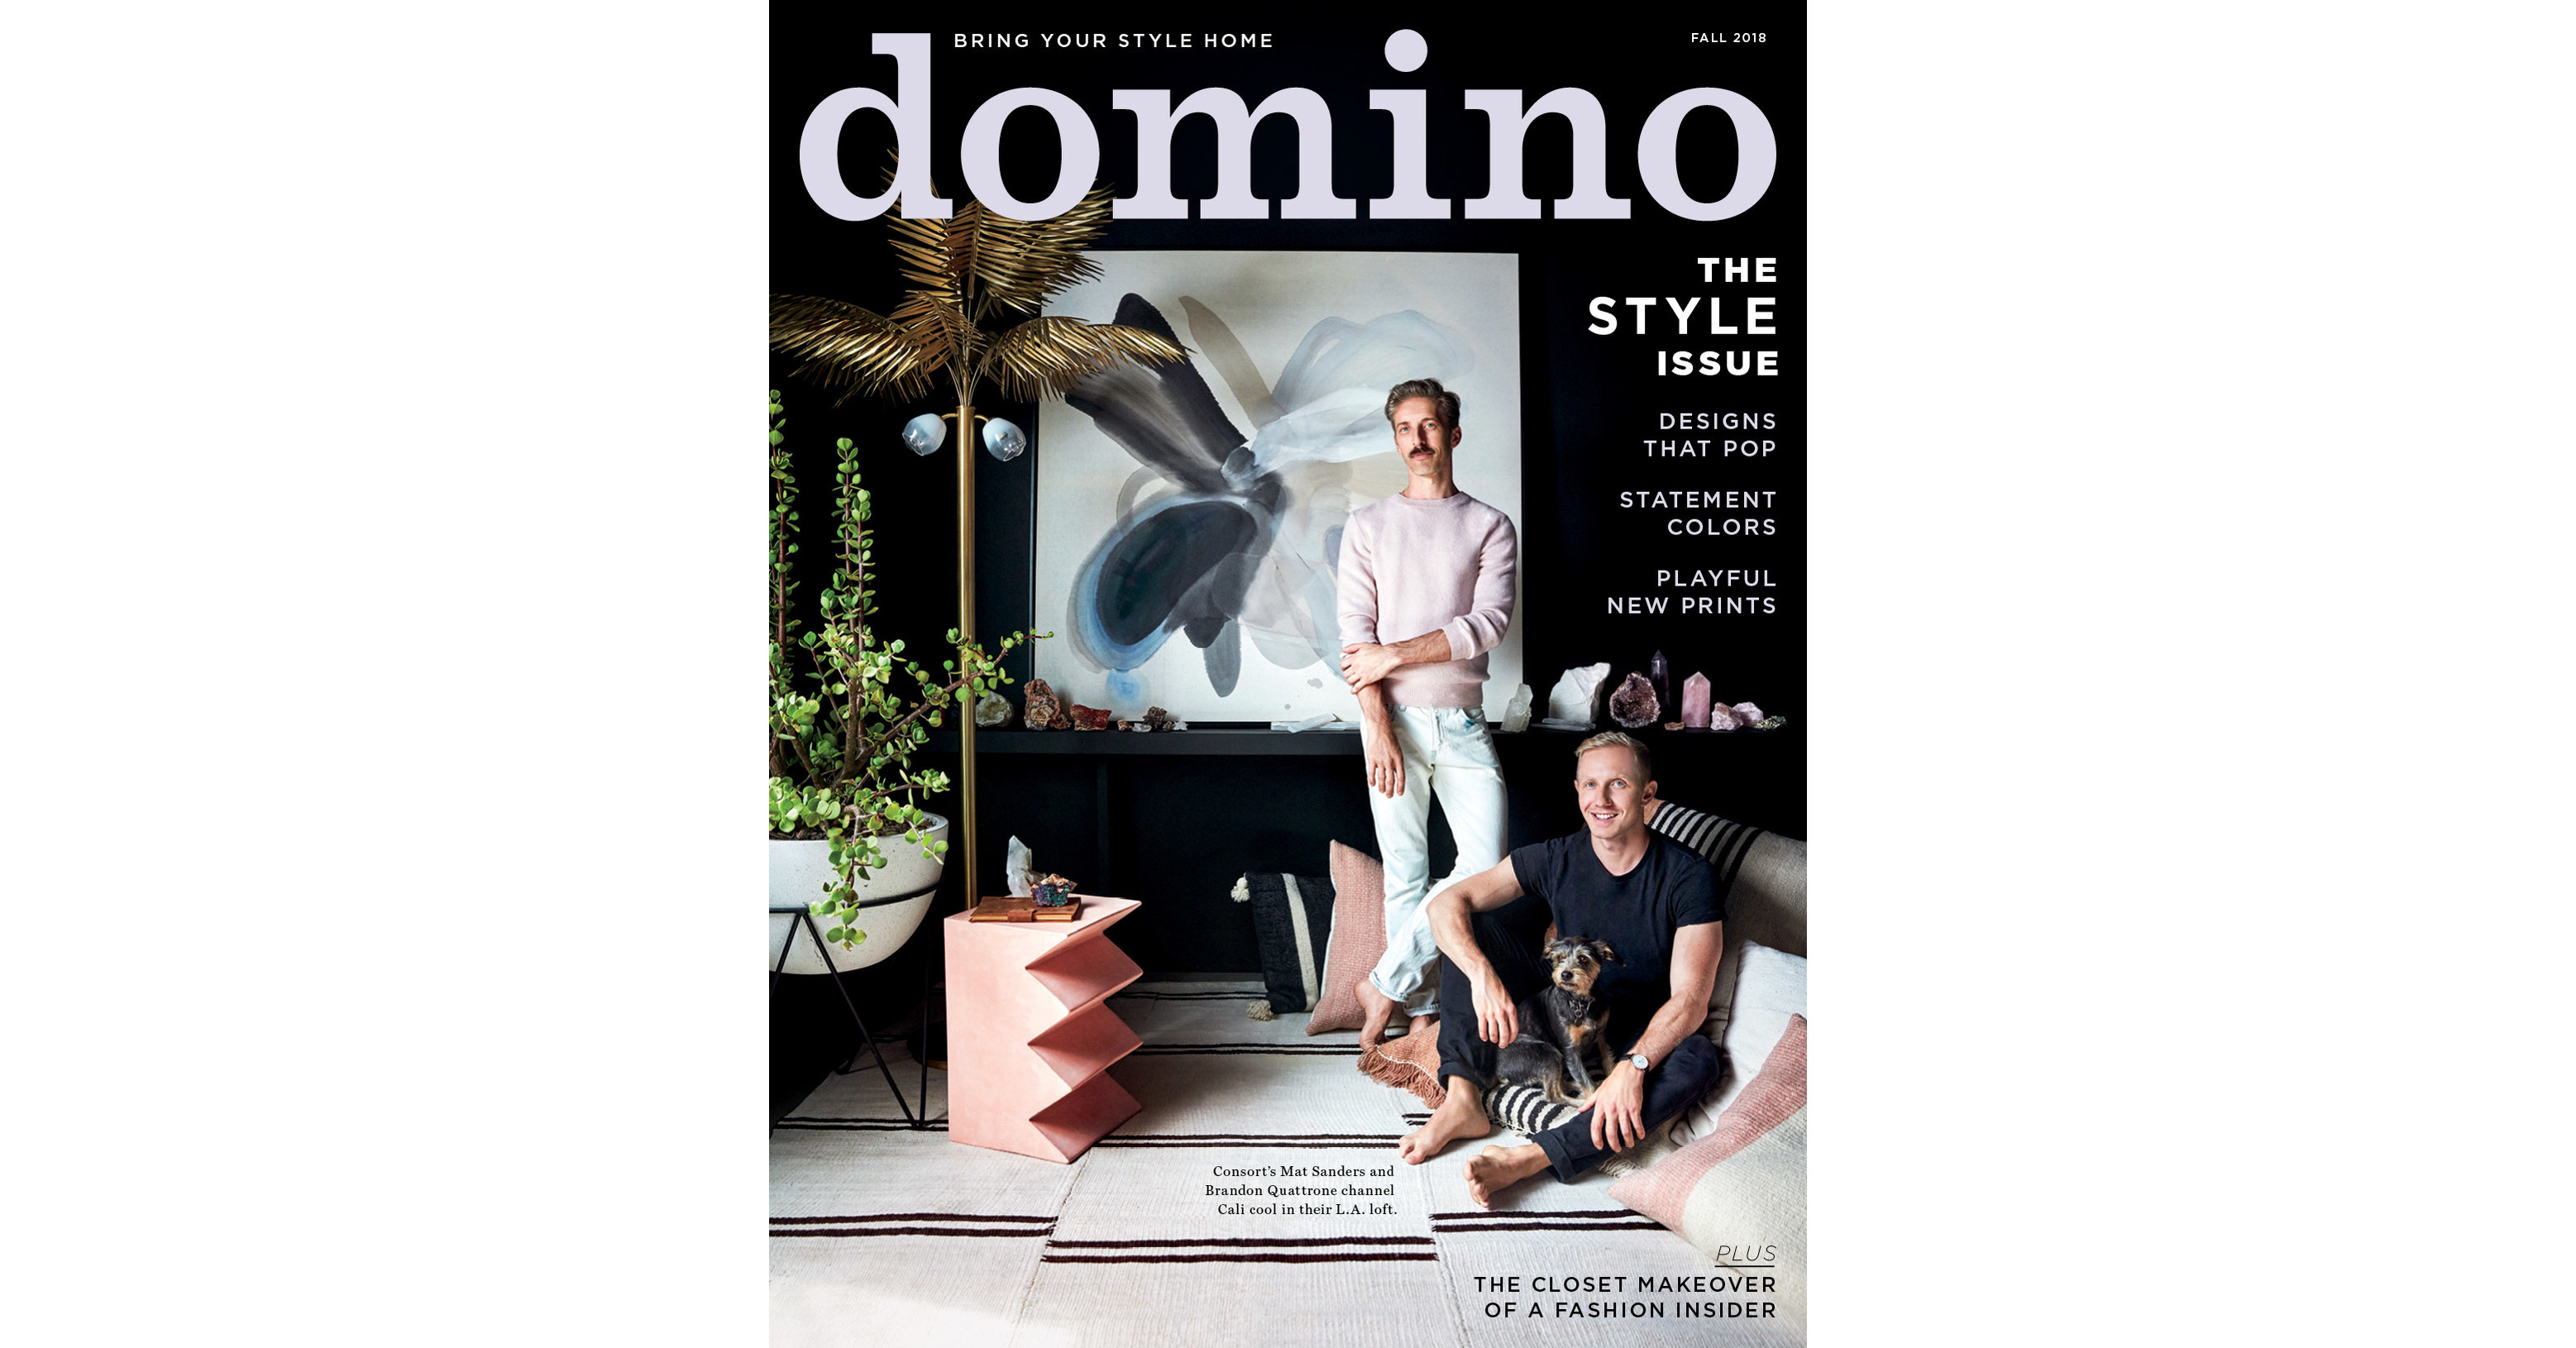 Domino Magazine's 2018 Fall Style Issue on Newsstands Today